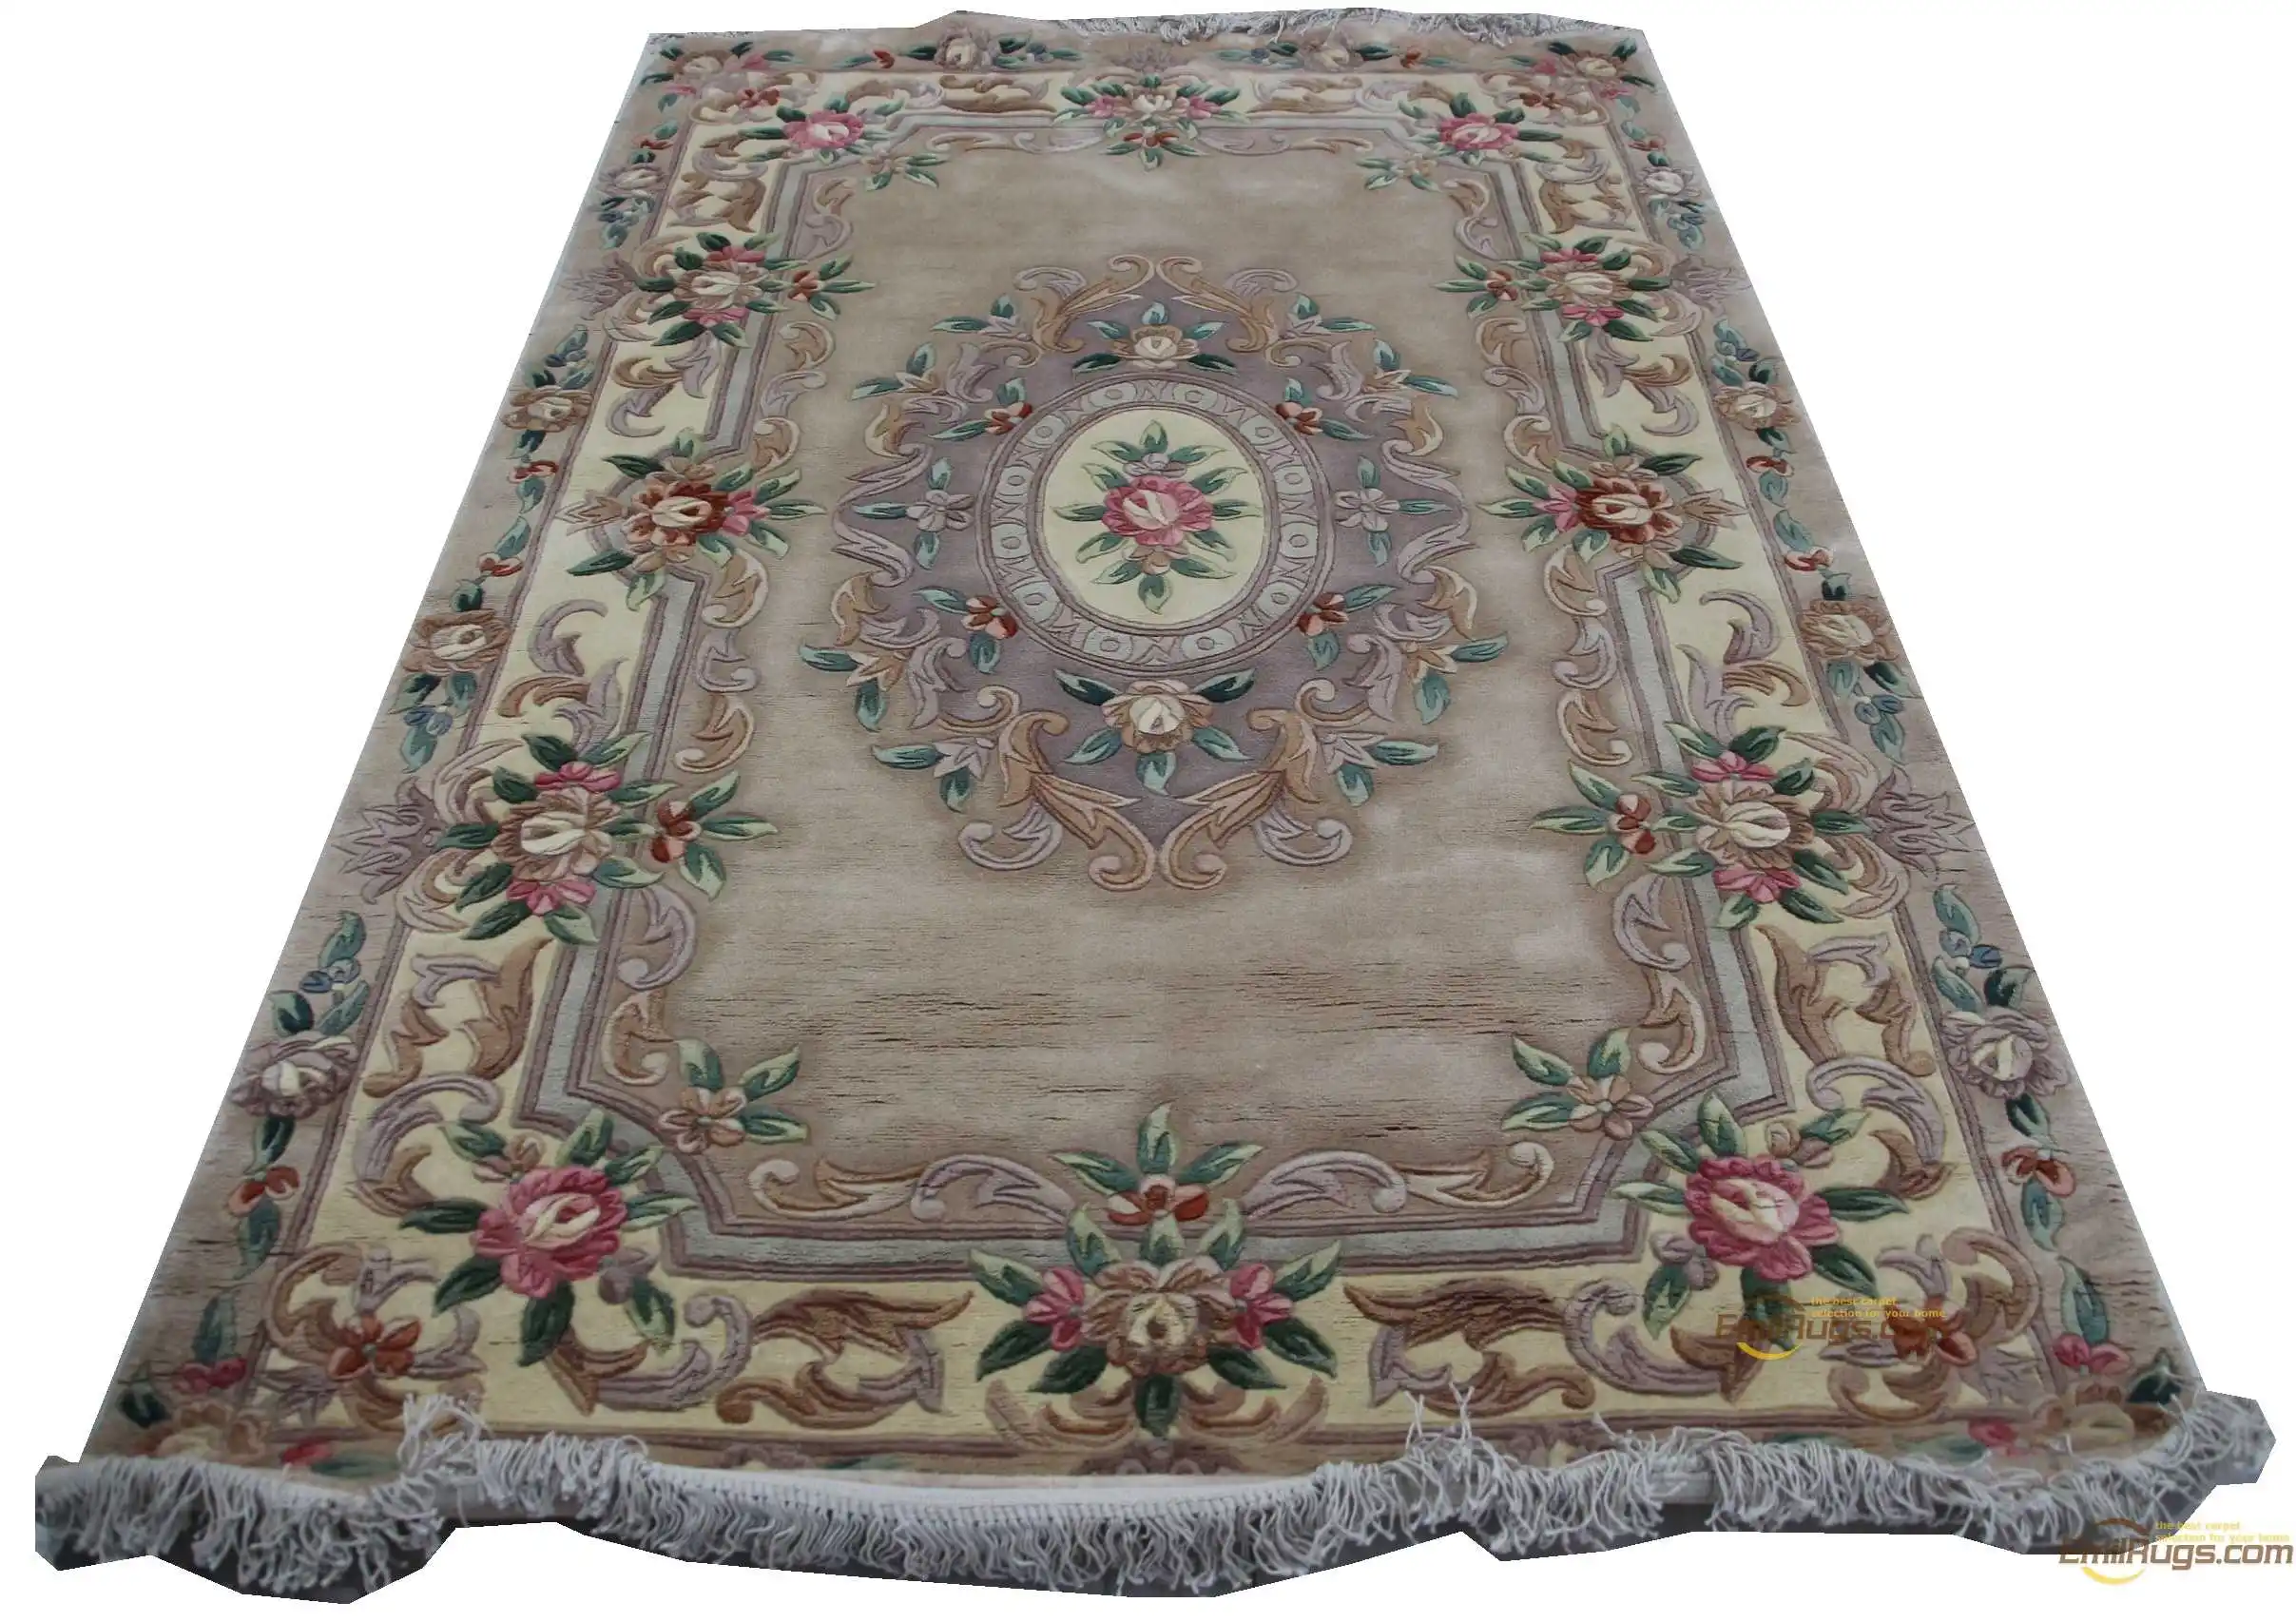 

Hand-knotted Thick Plush Wool French Savonnerie Rug Woven Antique Decor Runner Rug The Plant Design Natural Sheep Wool